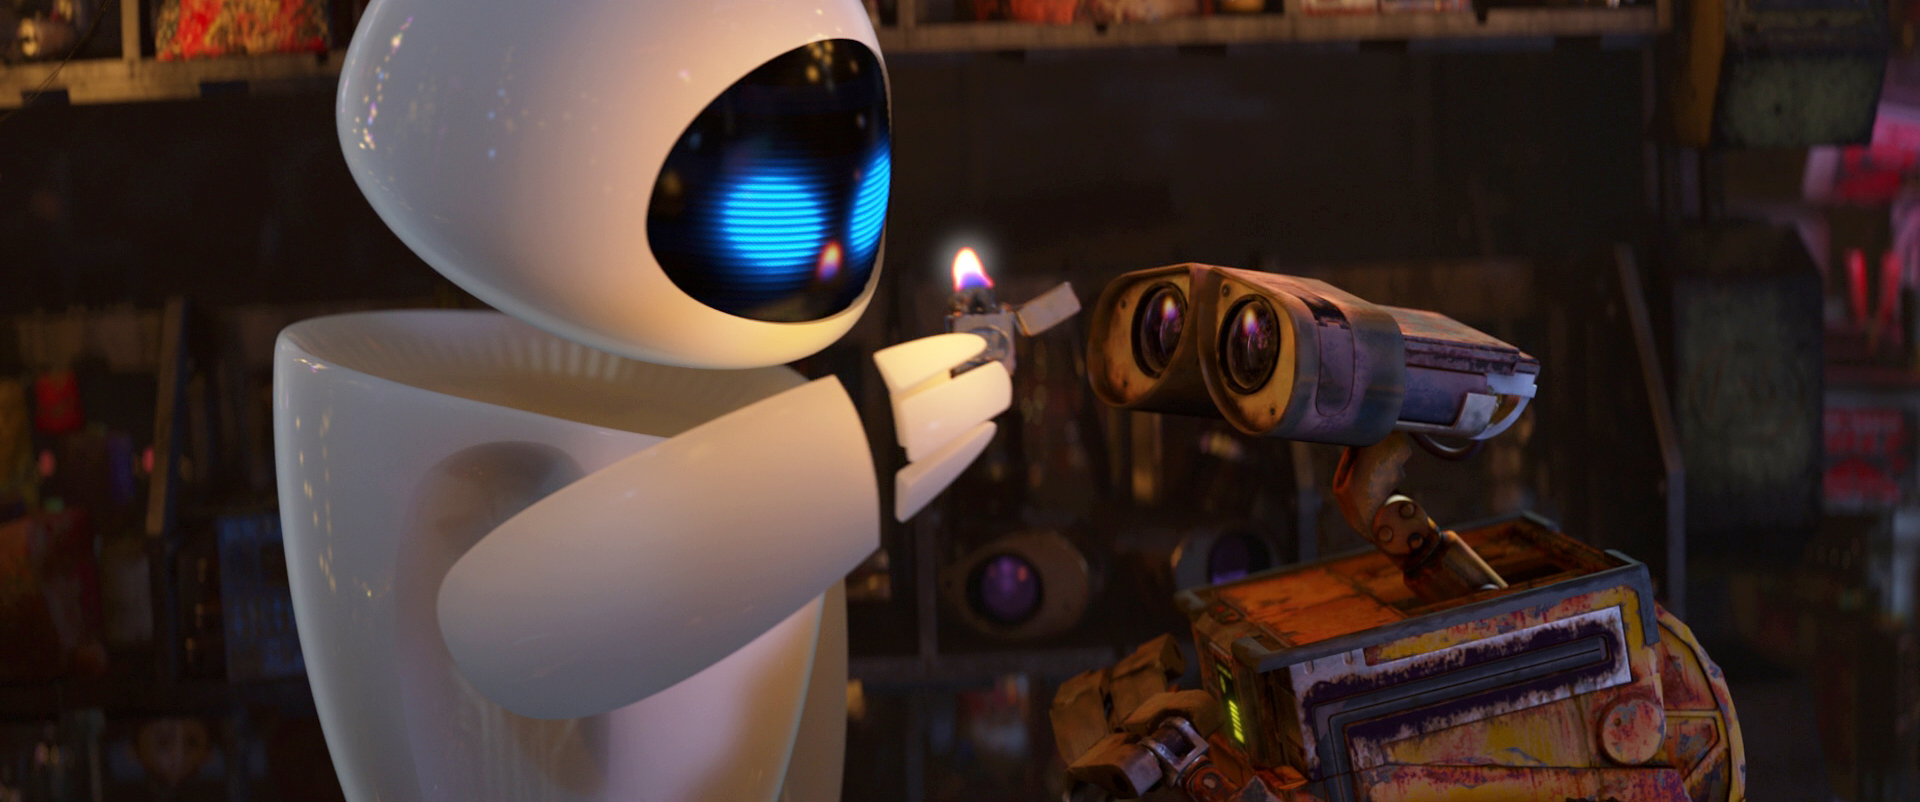 wall e movie review in 100 words